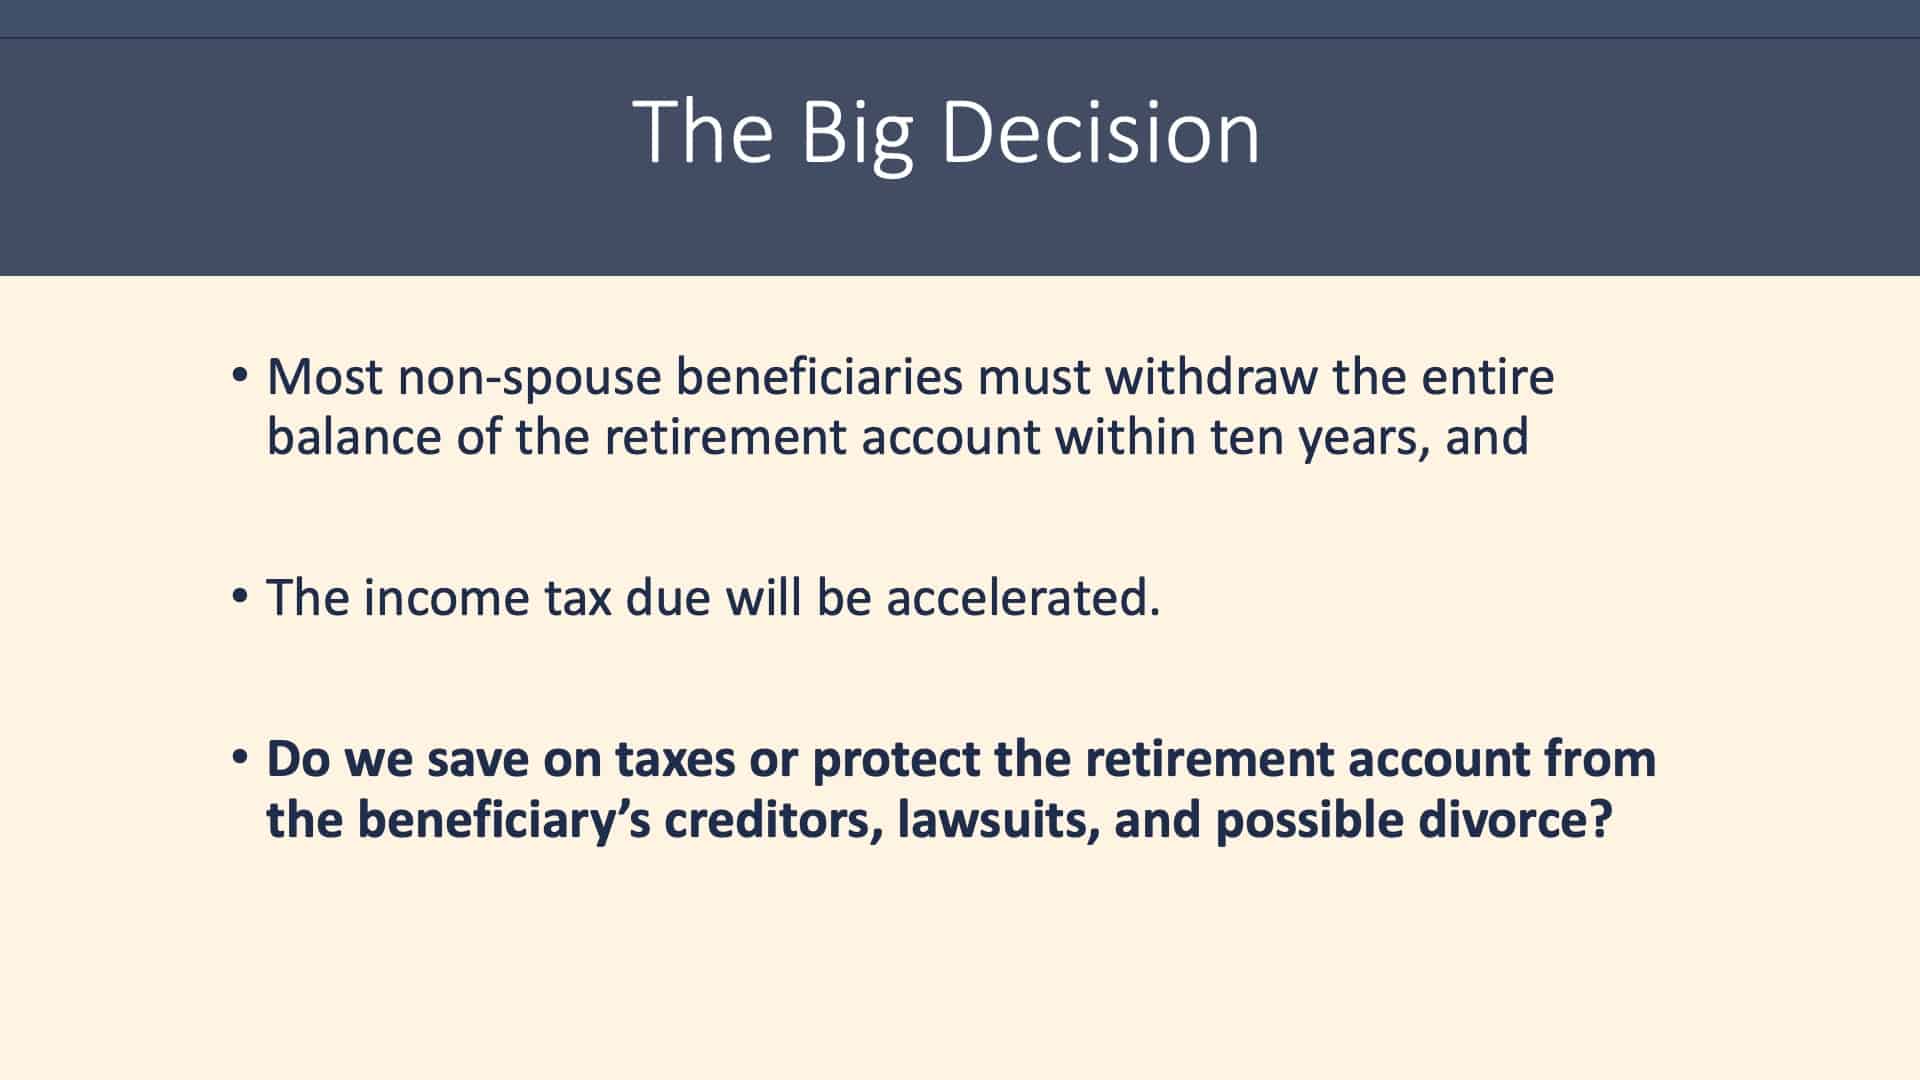 Is a Will Enough? - The Big Decision